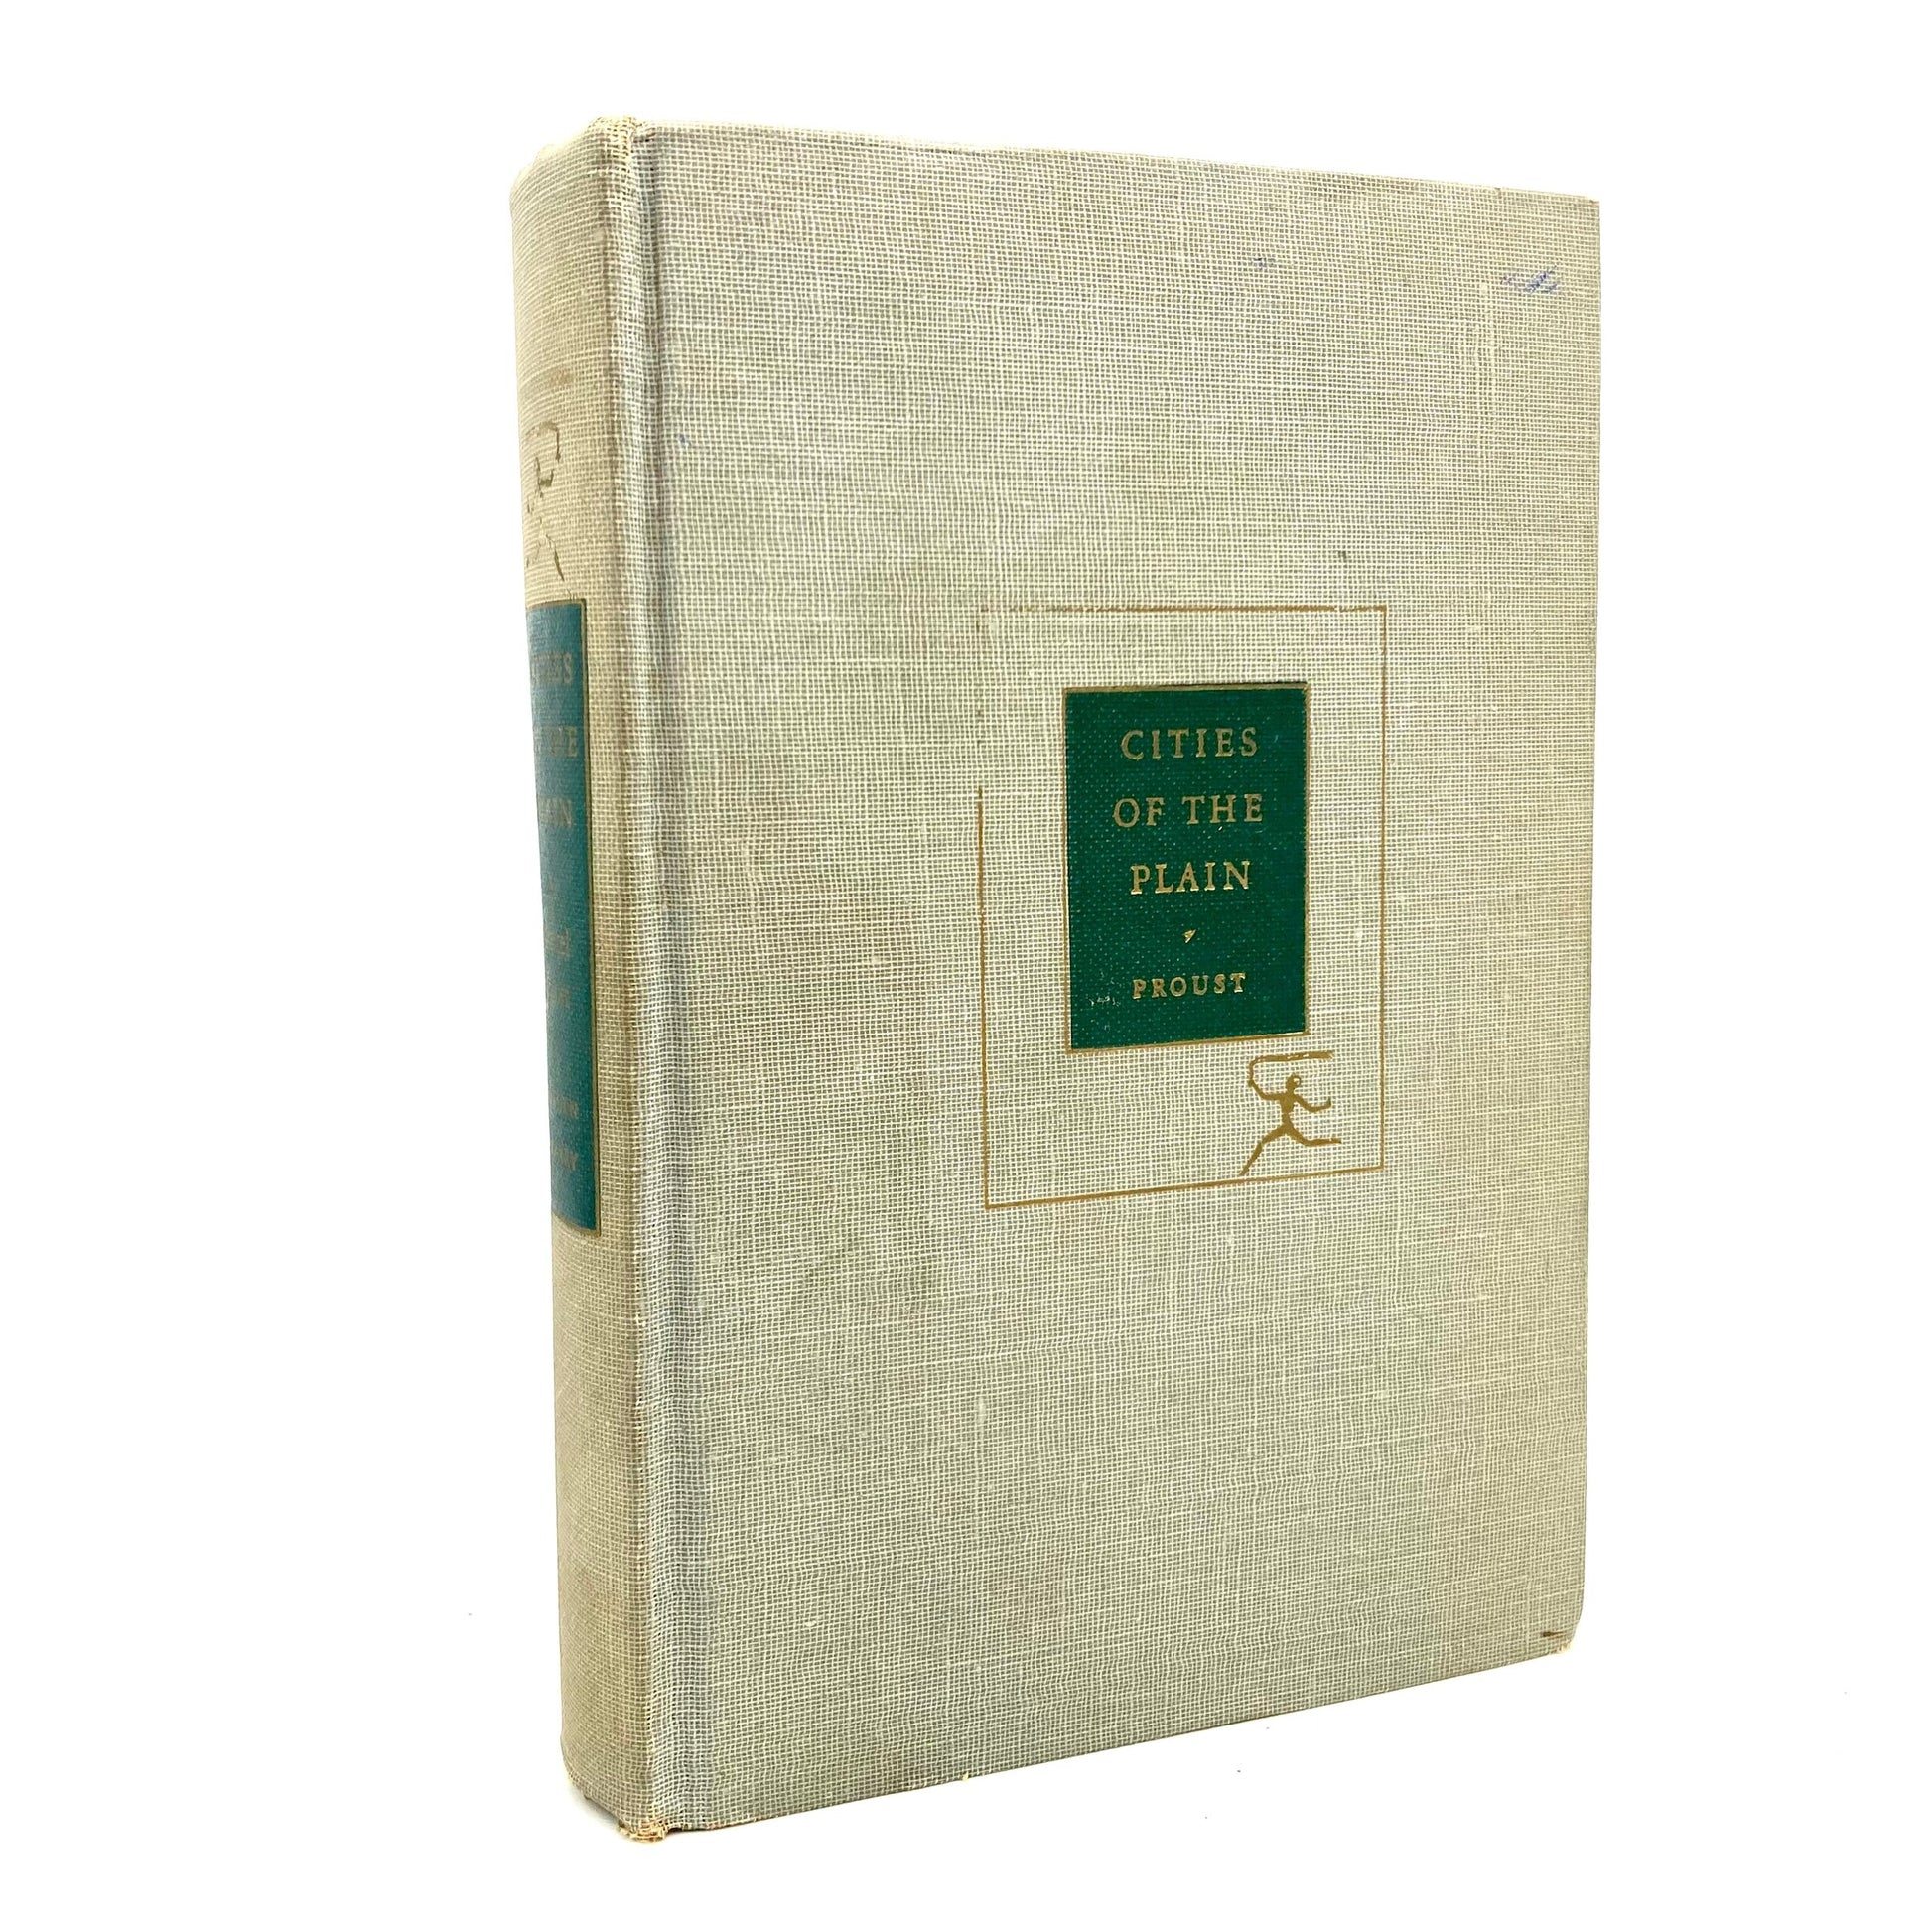 PROUST, Marcel "Cities of the Plain" [Modern Library, 1927] - Buzz Bookstore